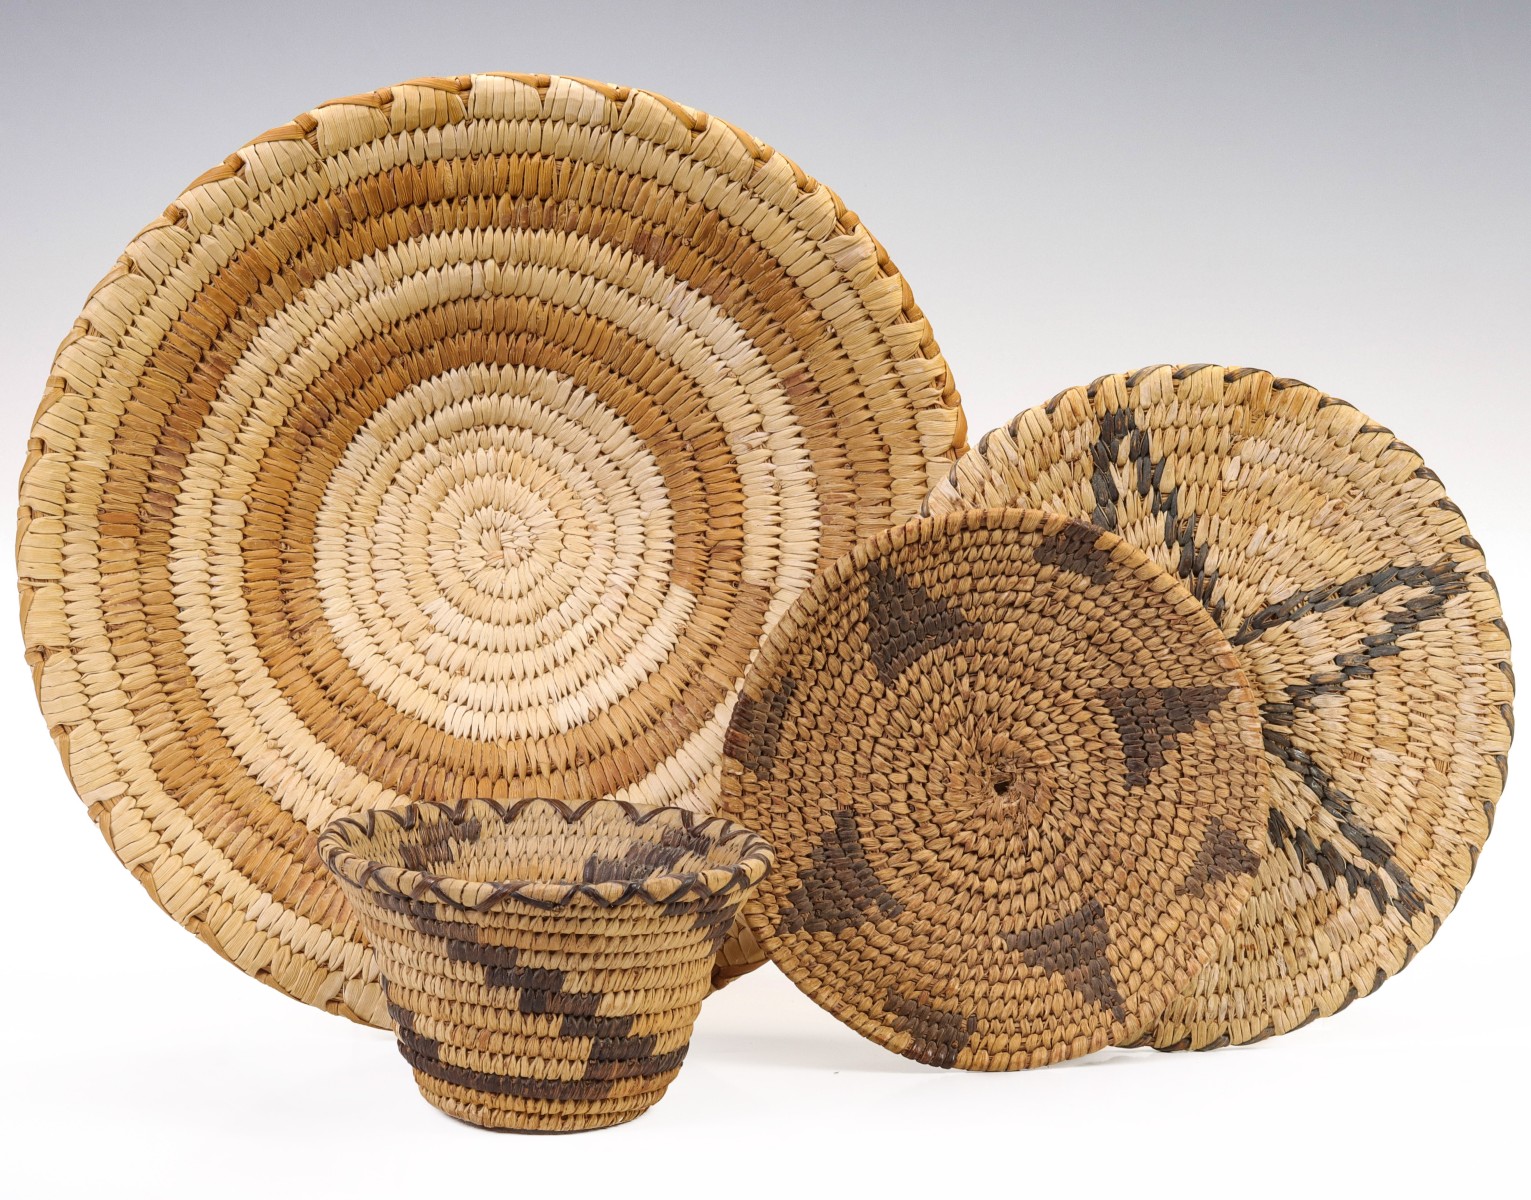 A COLLECTION OF PAPAGO BASKETRY ITEMS